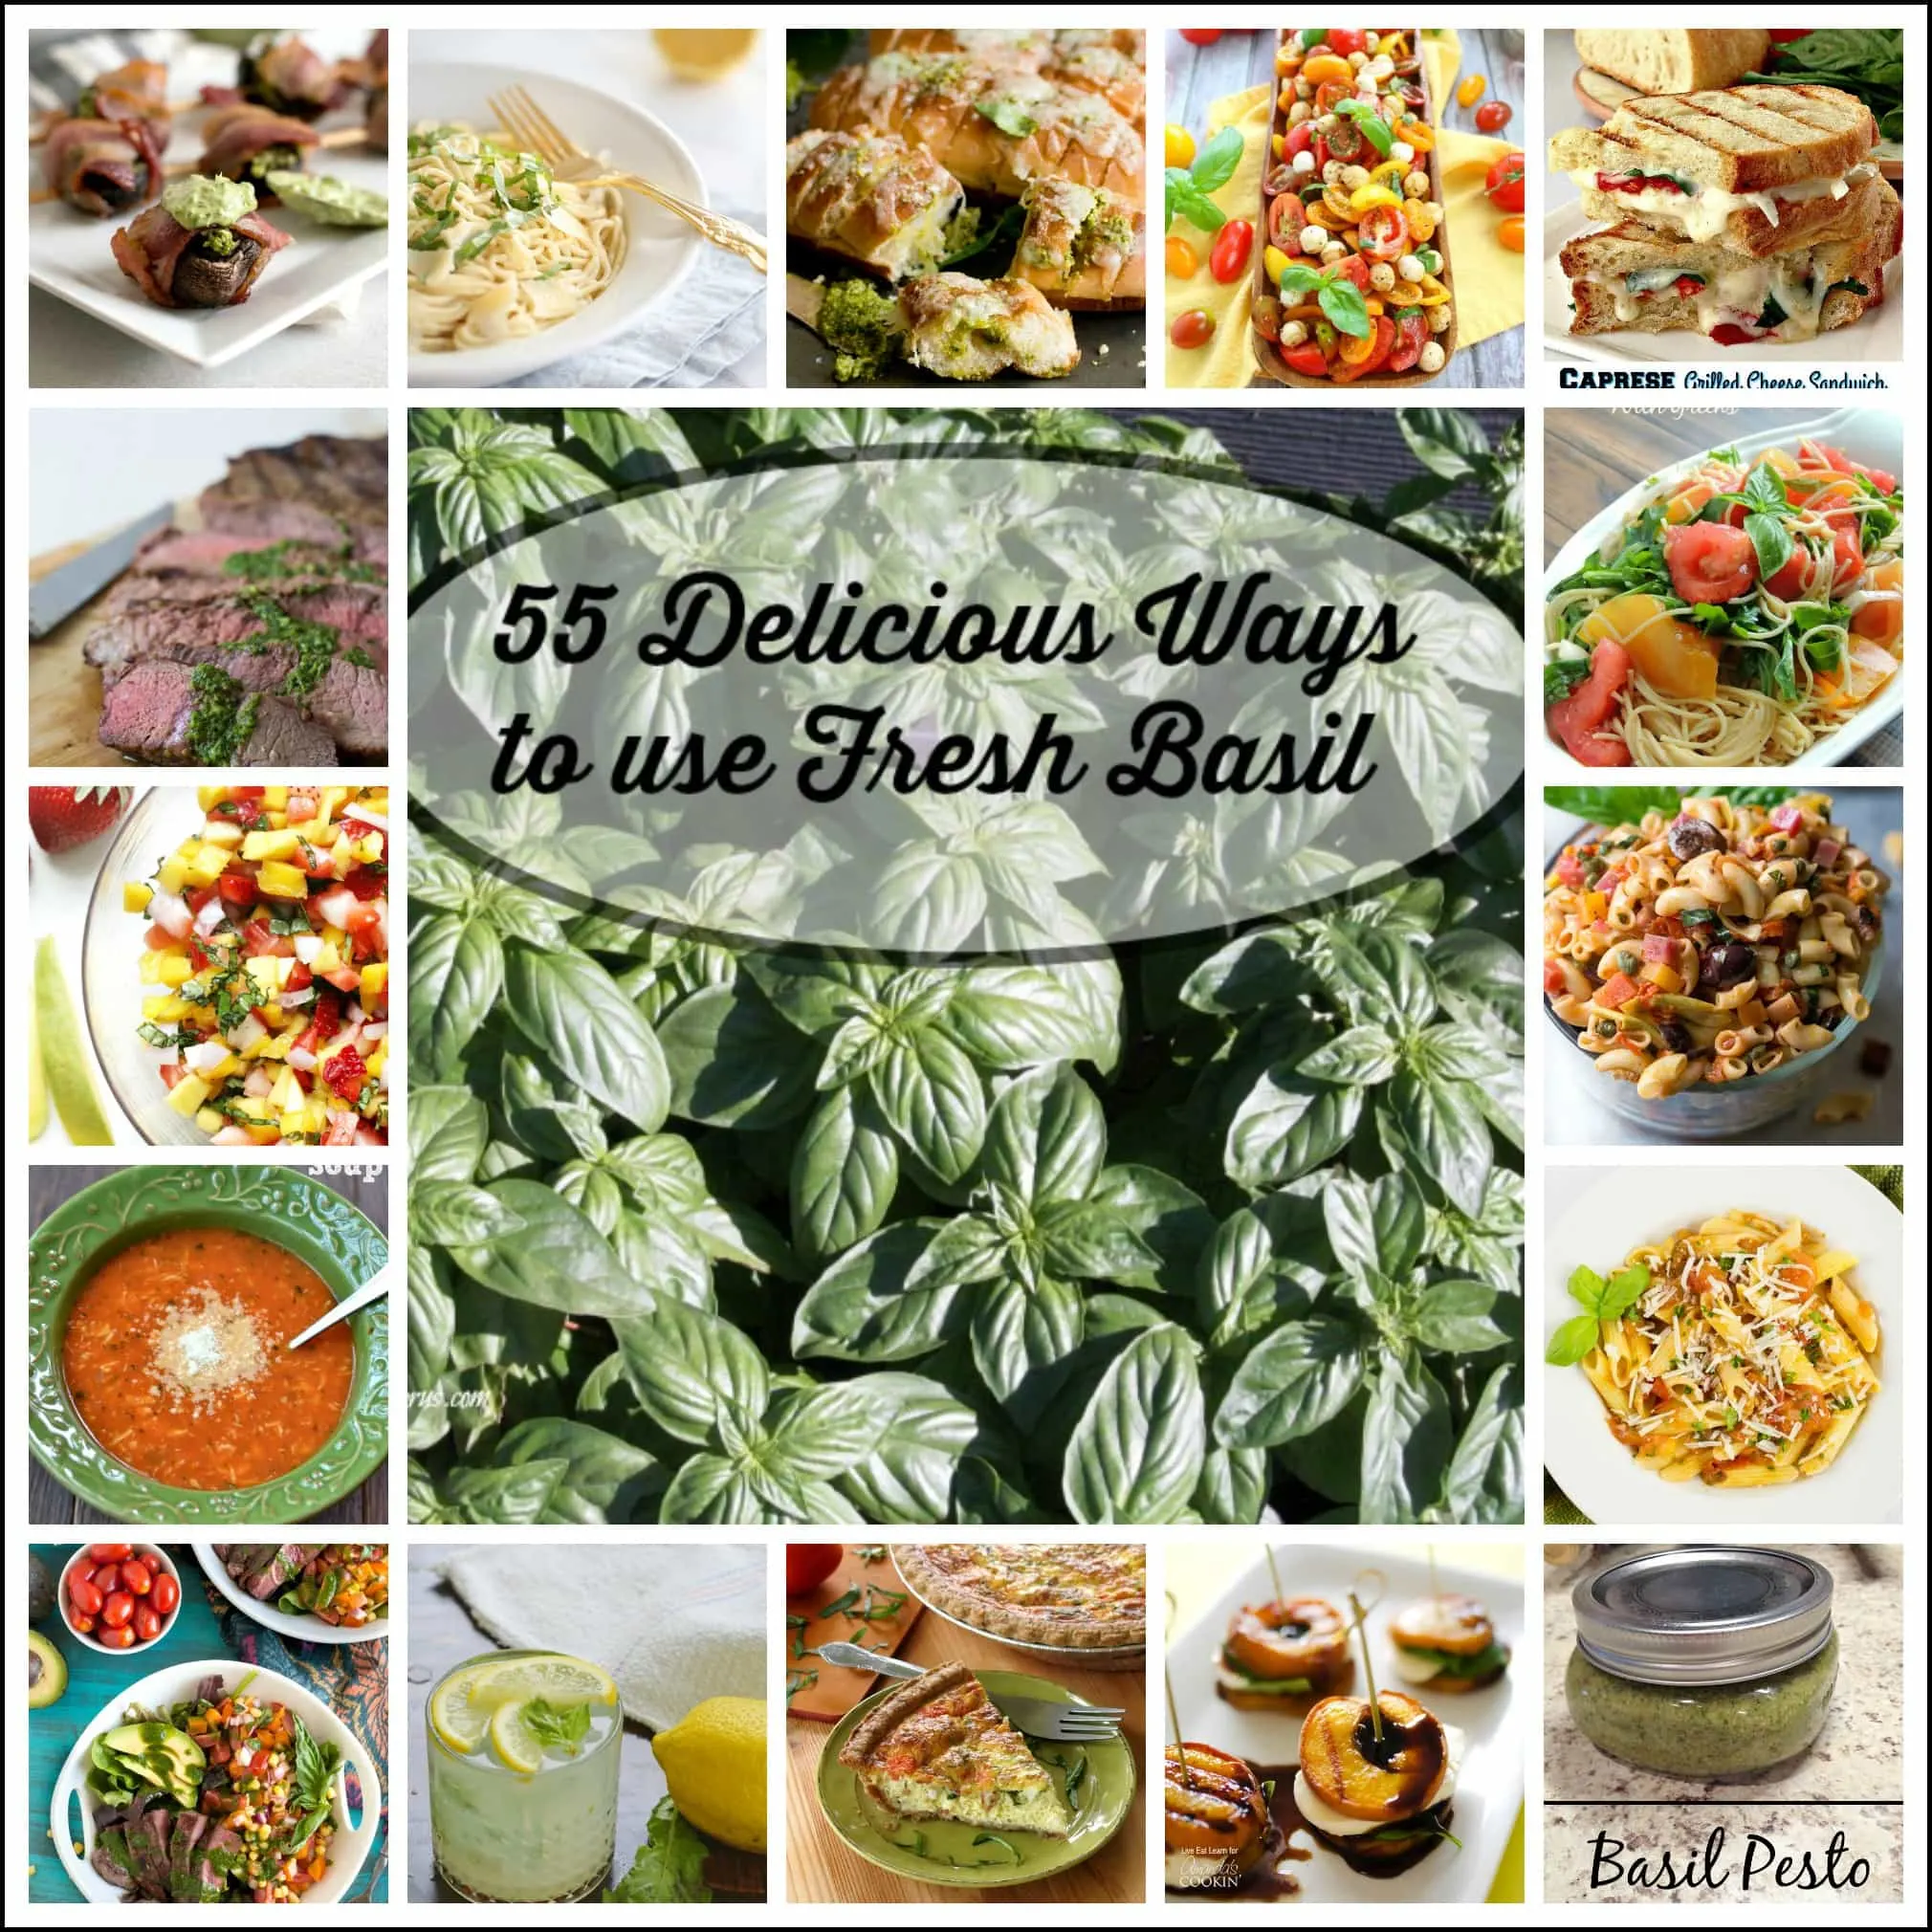 over 55 different sweet basil recipes that use fresh basil